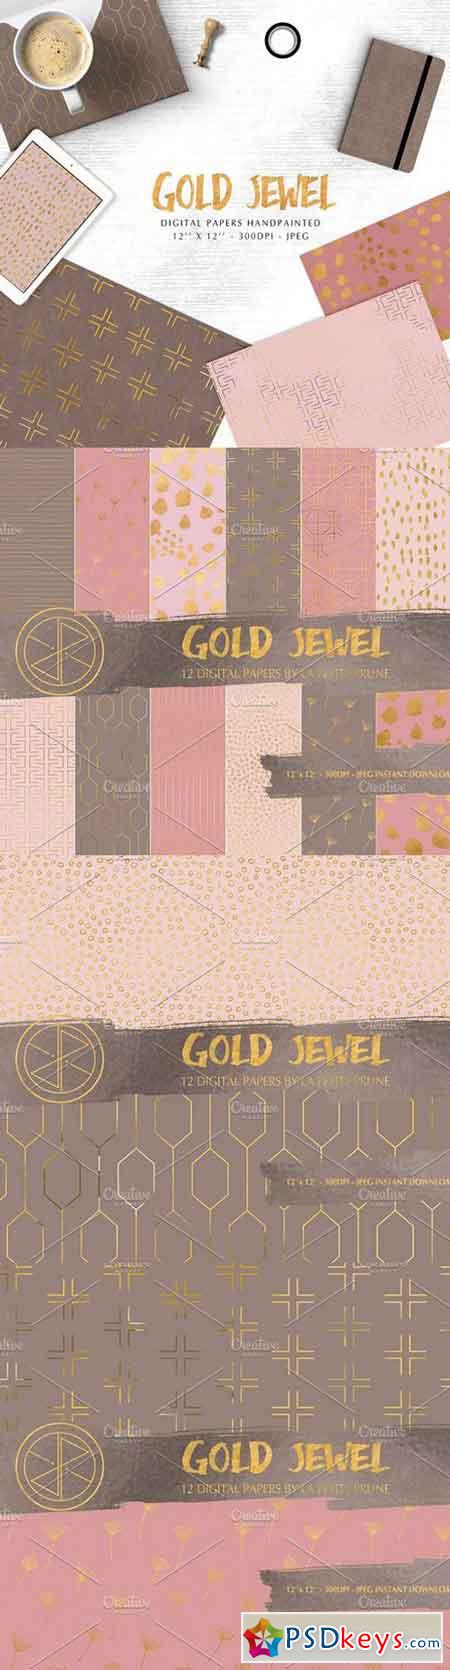 Gold jewel digital papers 1372183